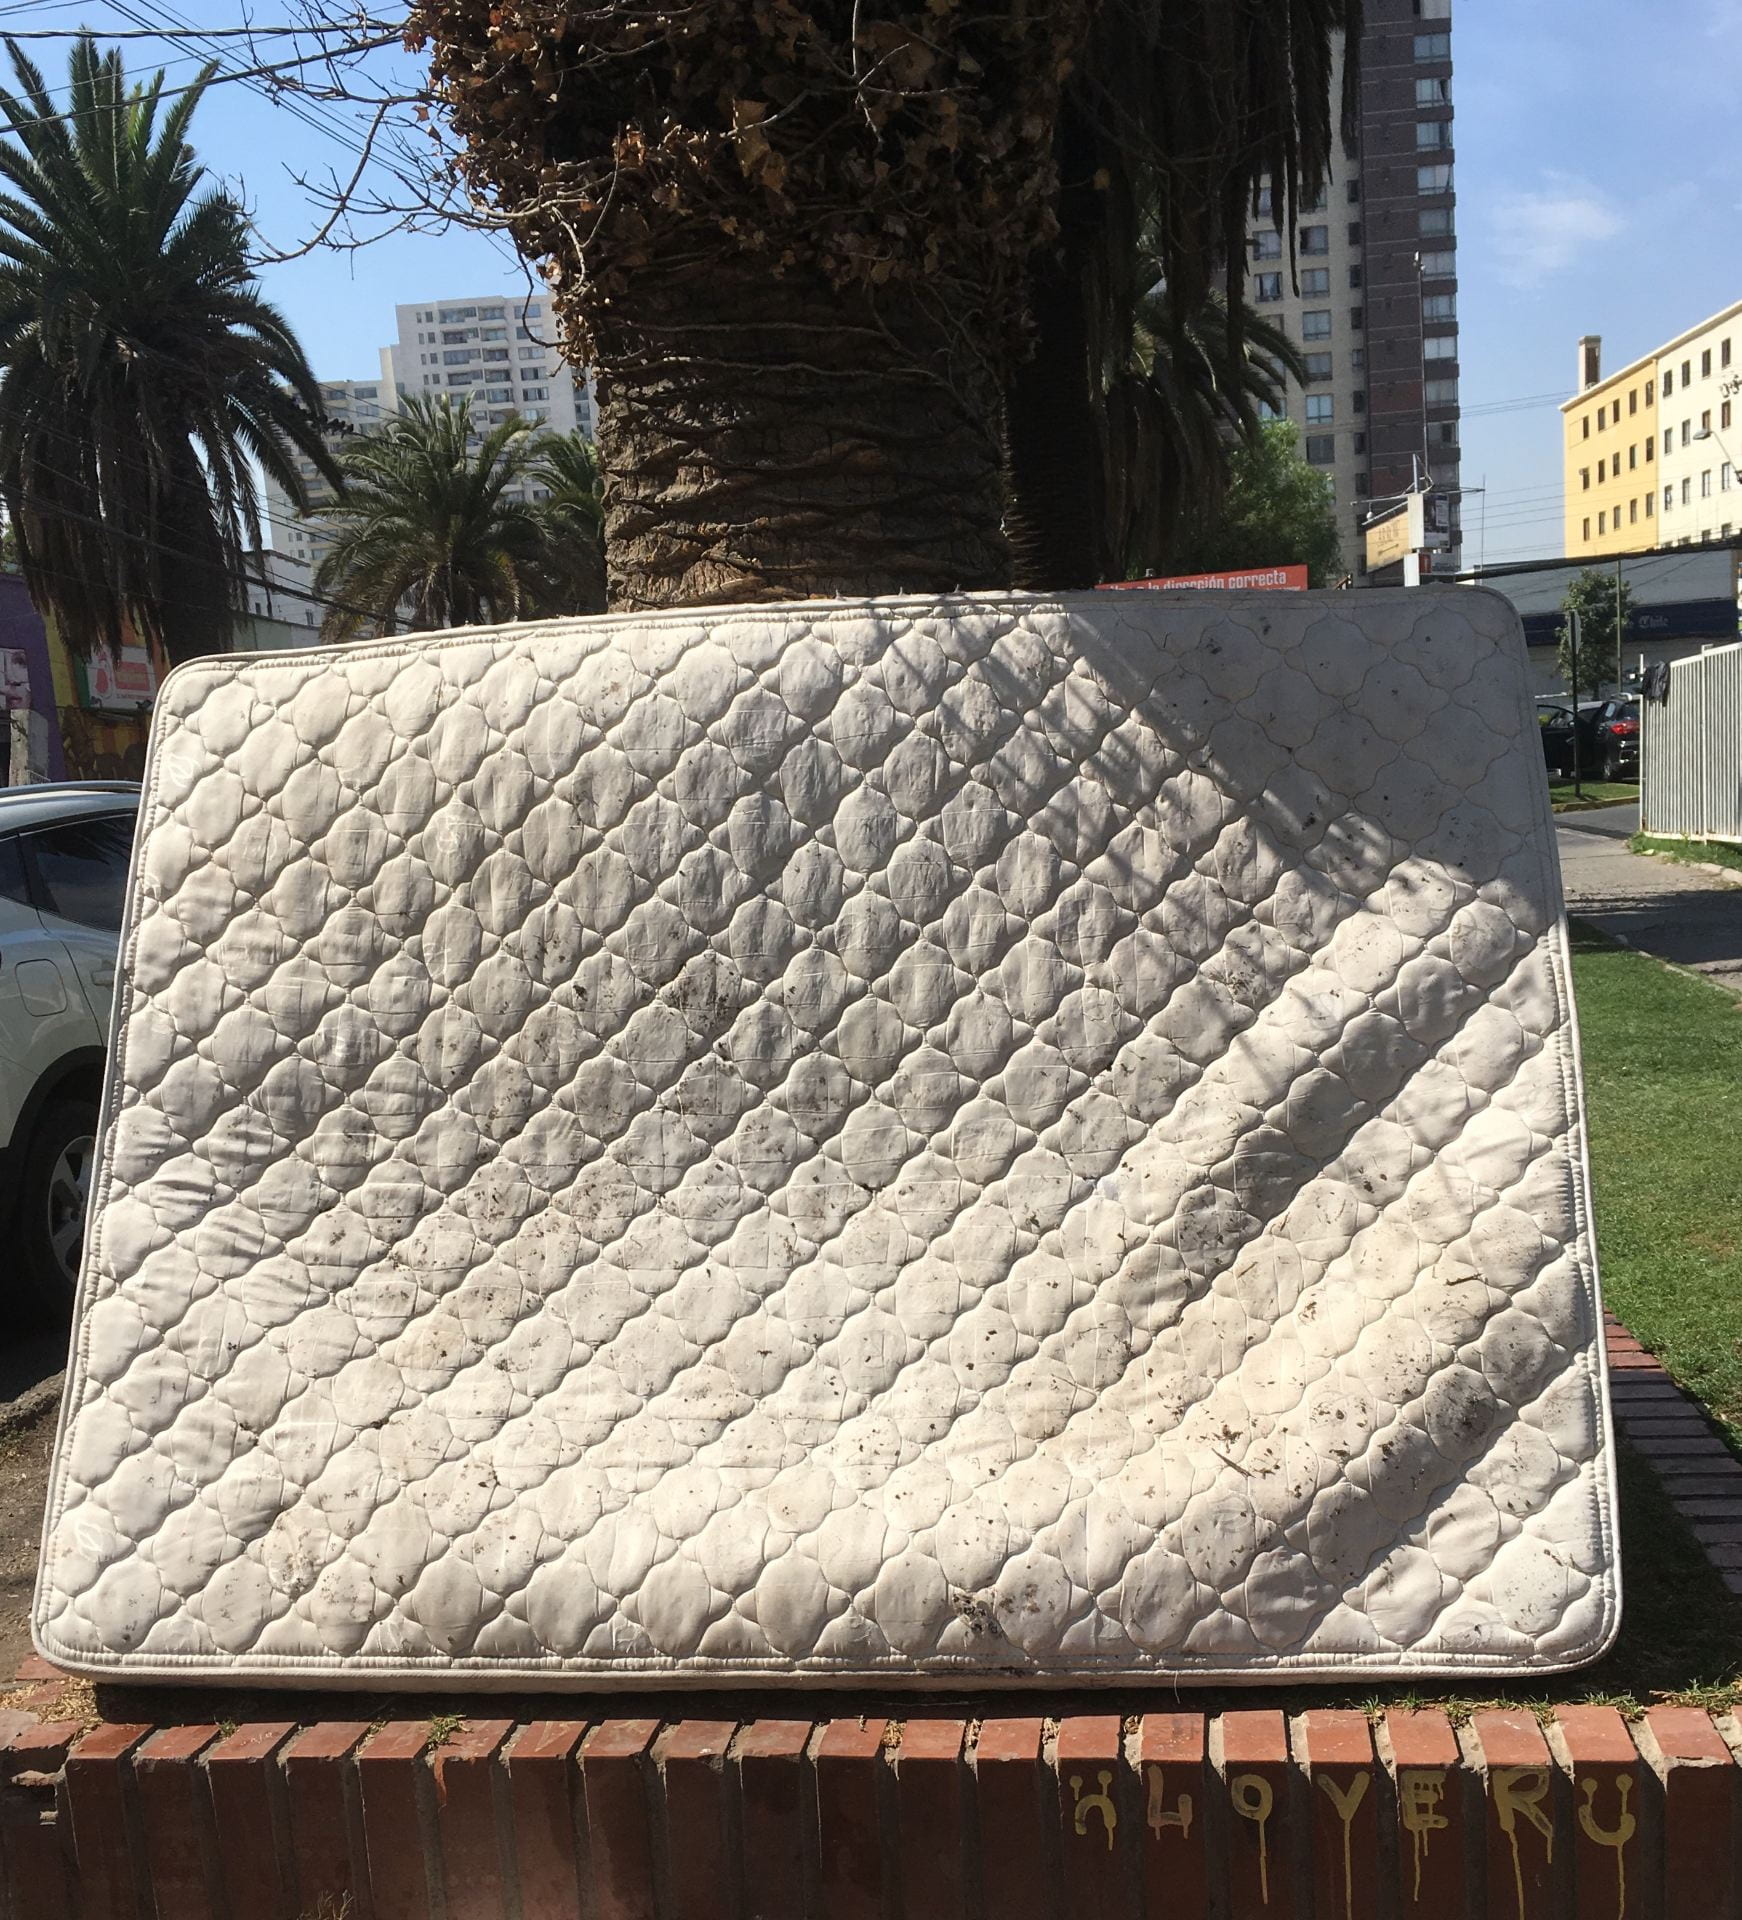 abandoned mattress in the street